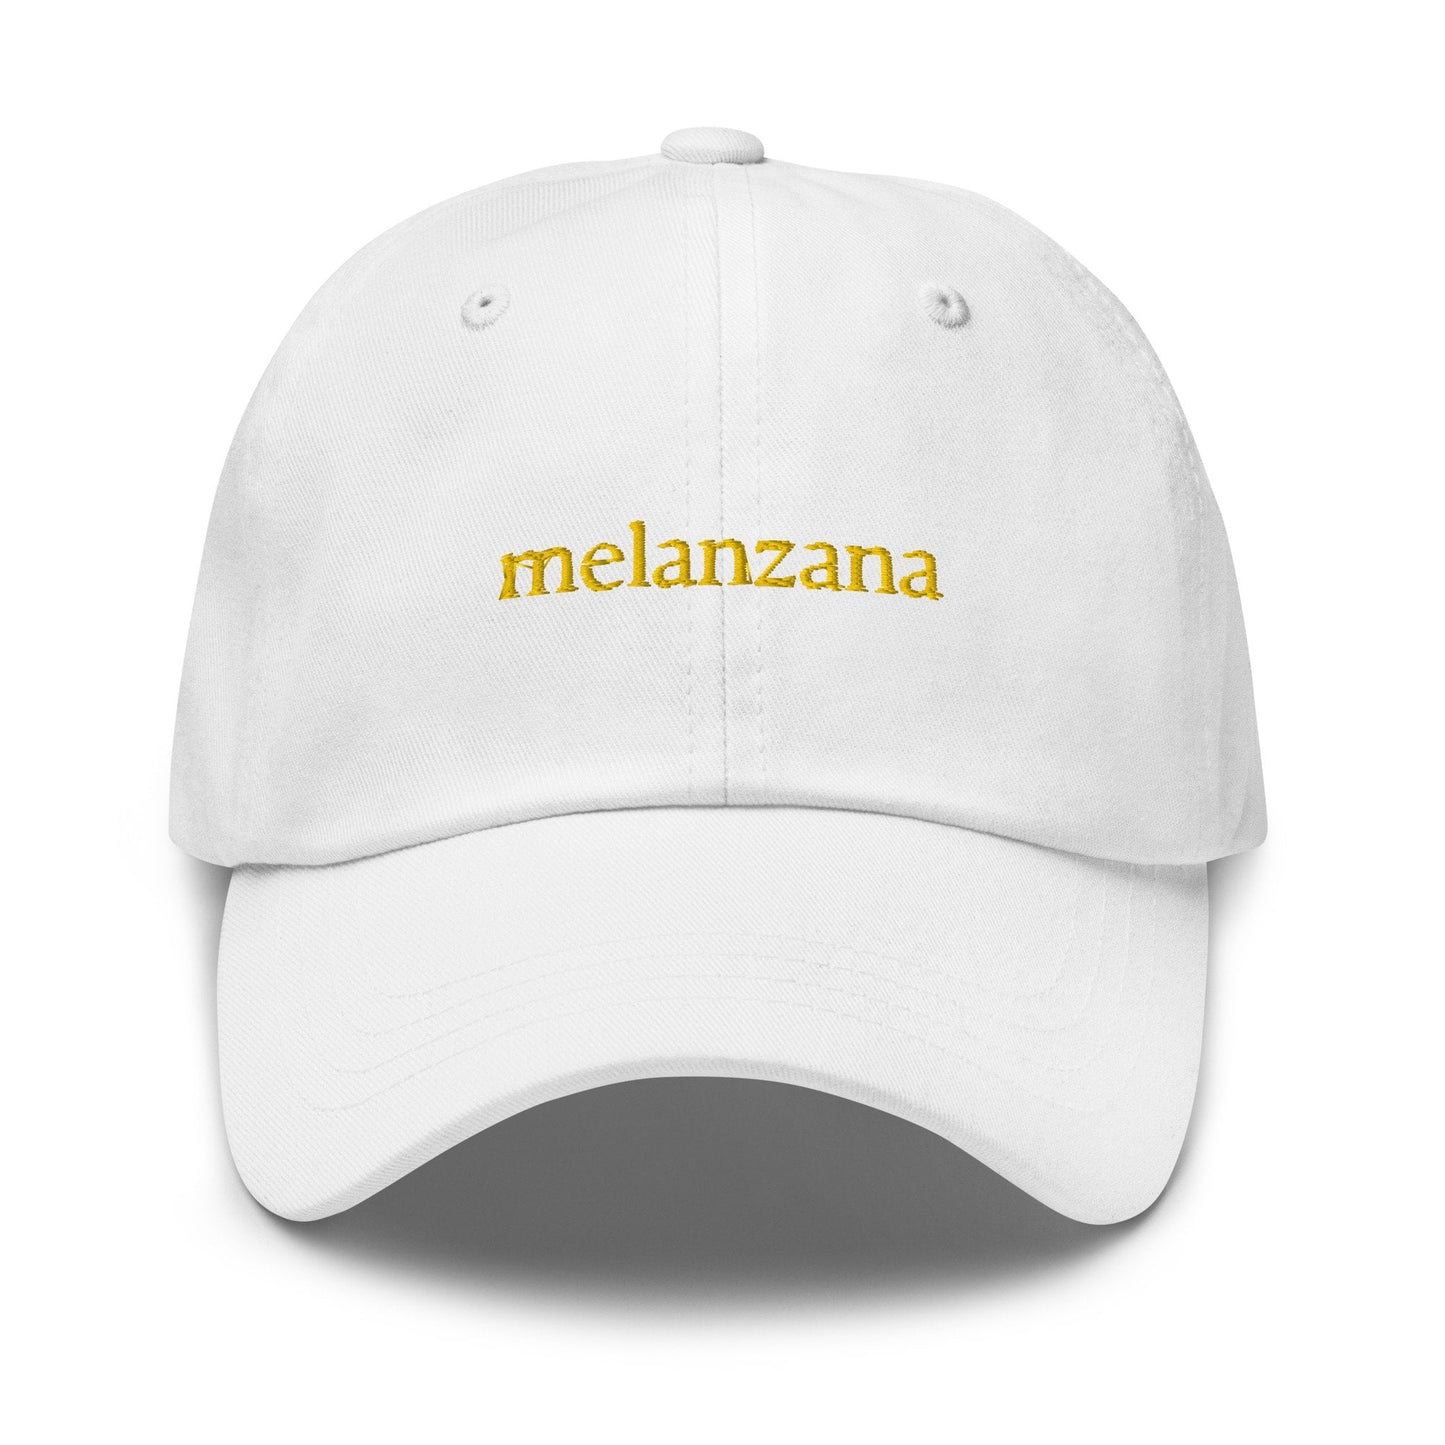 Melanzana Dad Hat - Gift for Italian Eggplant lovers - Cotton embroidered Cap